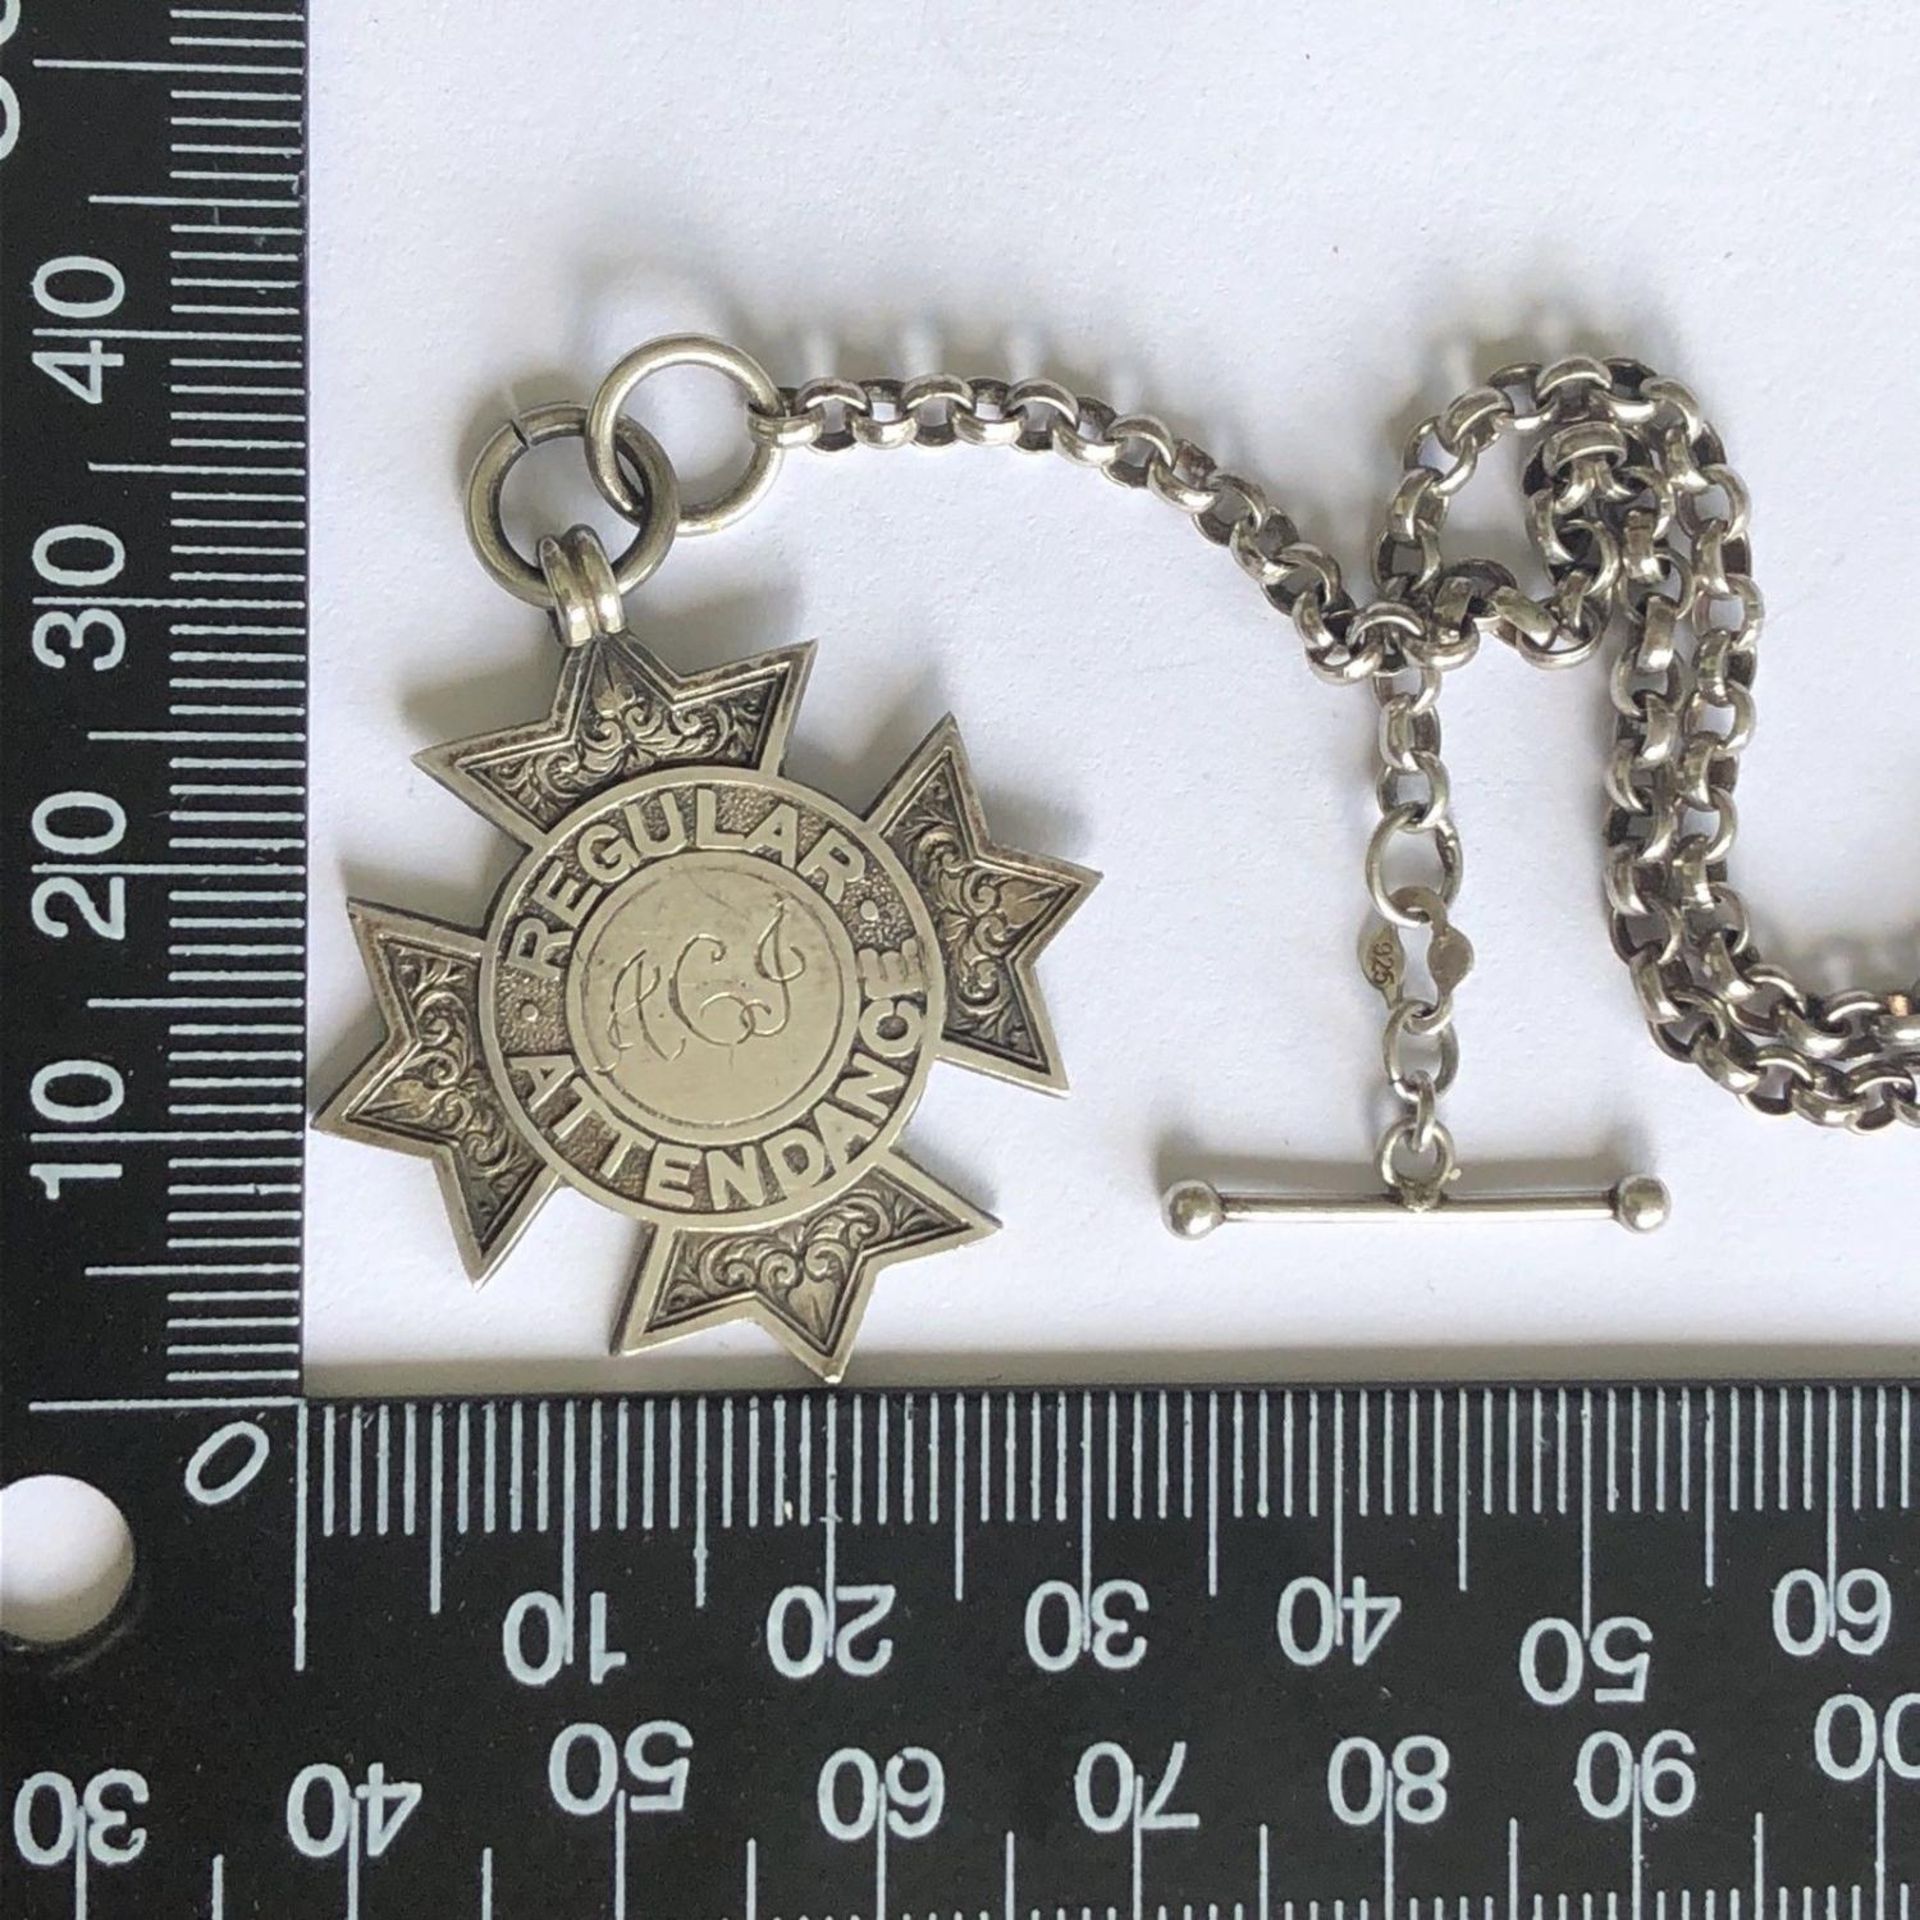 Antique Silver Ladies Hallmarked Fob Medal & Pocket Watch Chain Marked 925 c1906 - Image 3 of 3